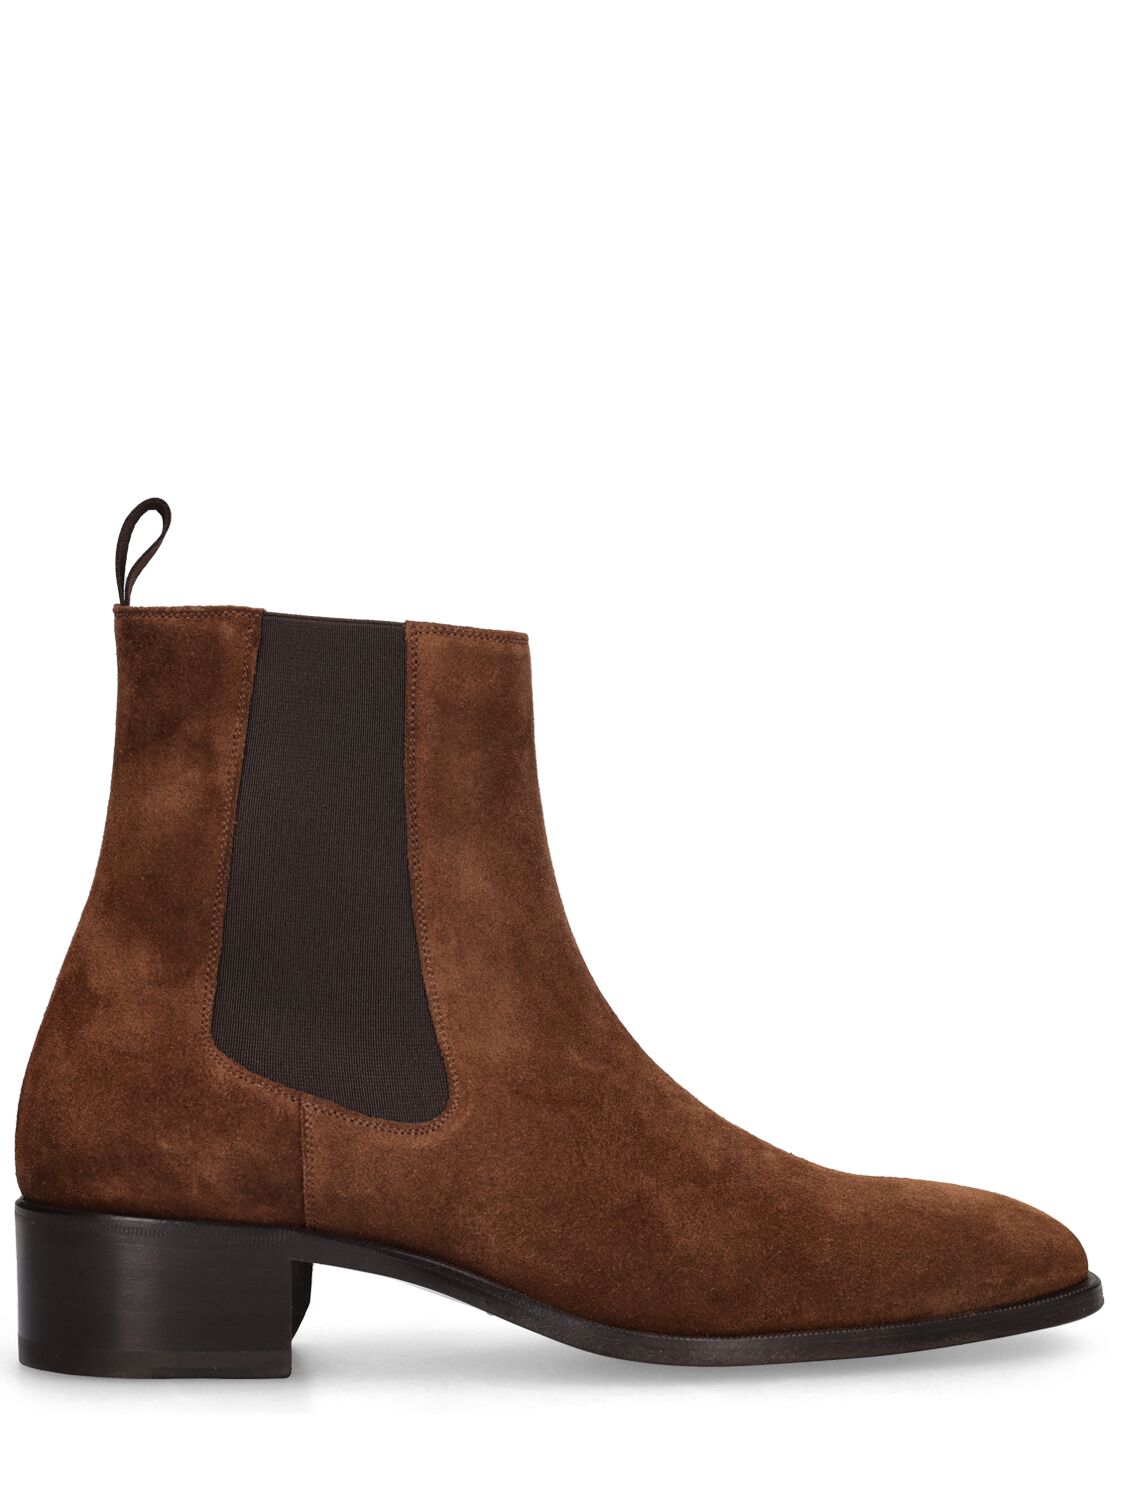 Mm Suede Ankle Boots - TOM FORD - Modalova